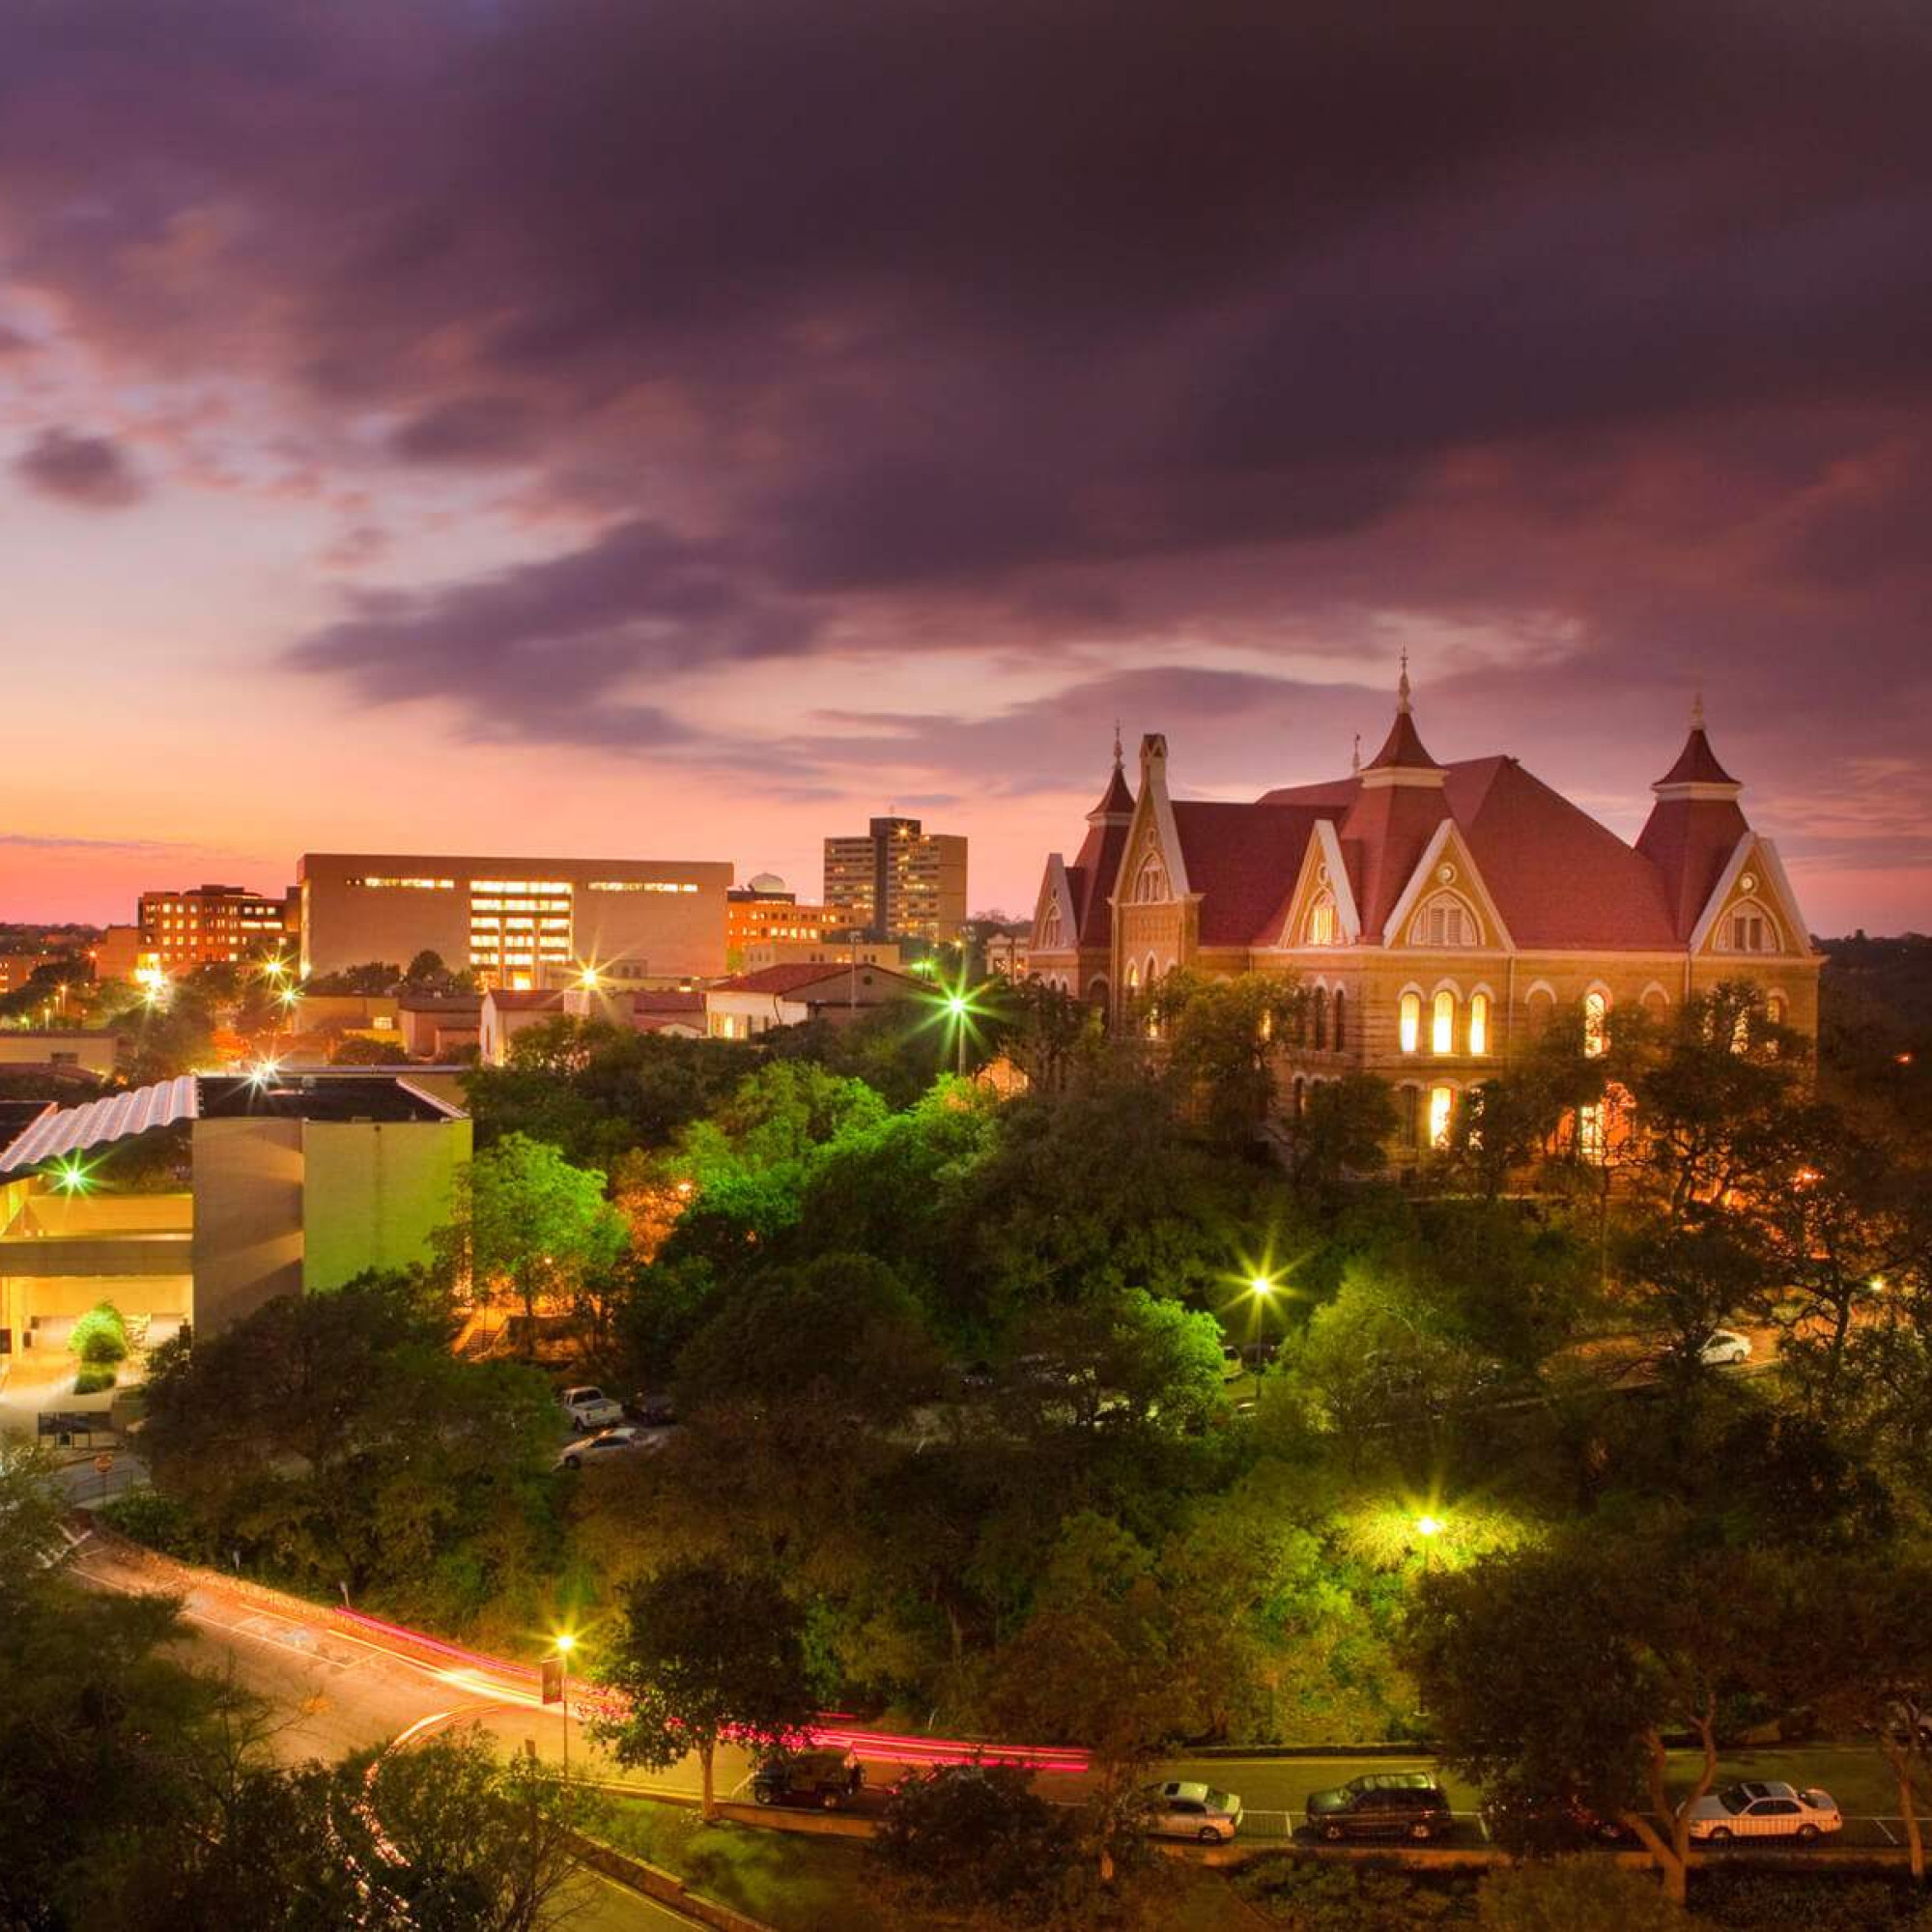 Texas State University at night with lights on